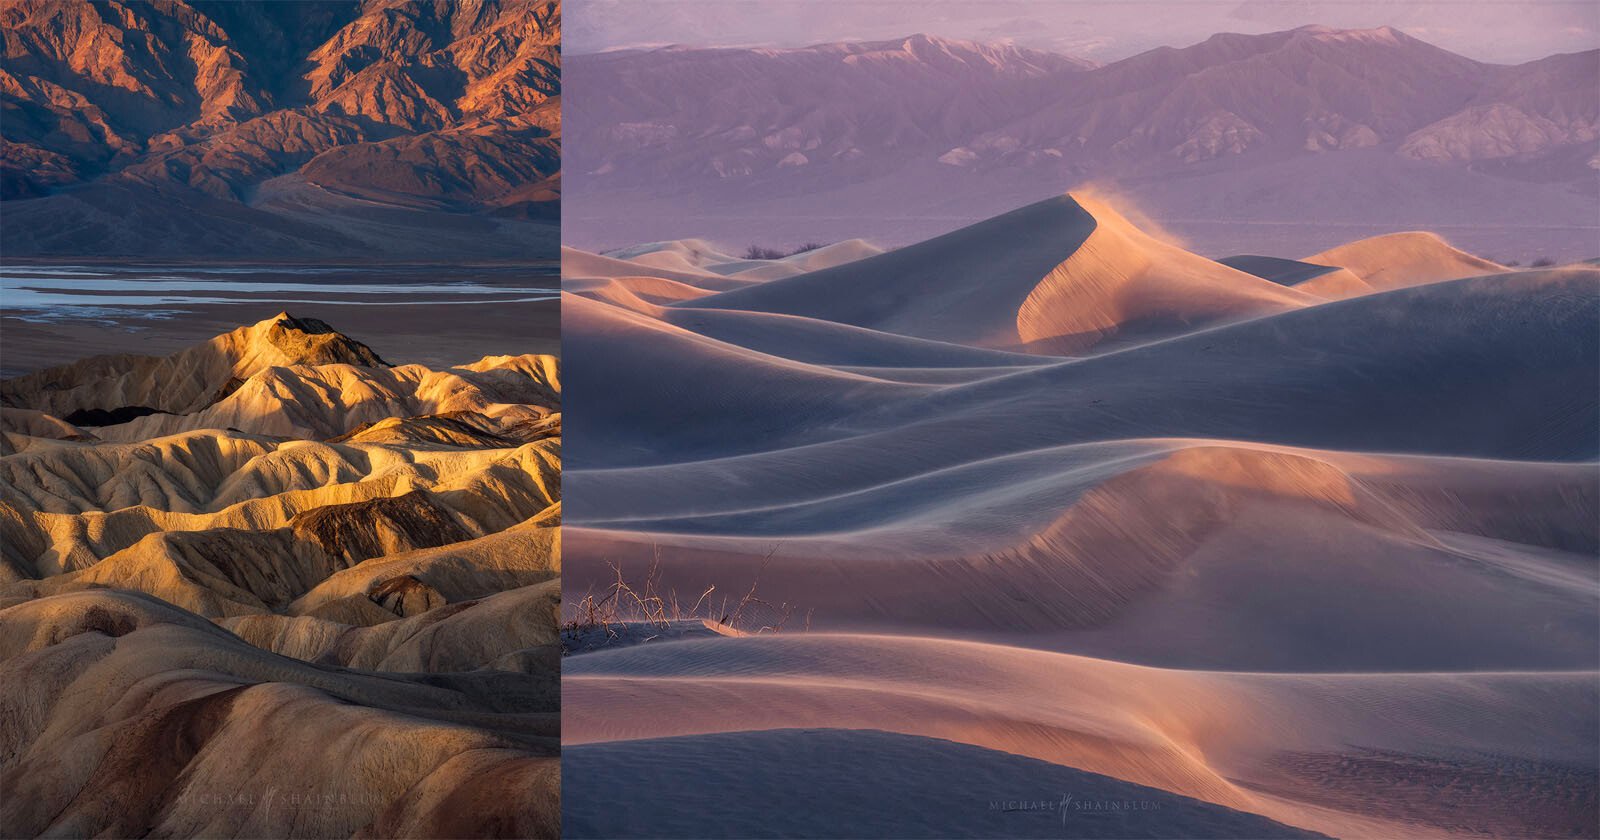 How To Properly Scout Locations To Get Gorgeous Landscape Photos